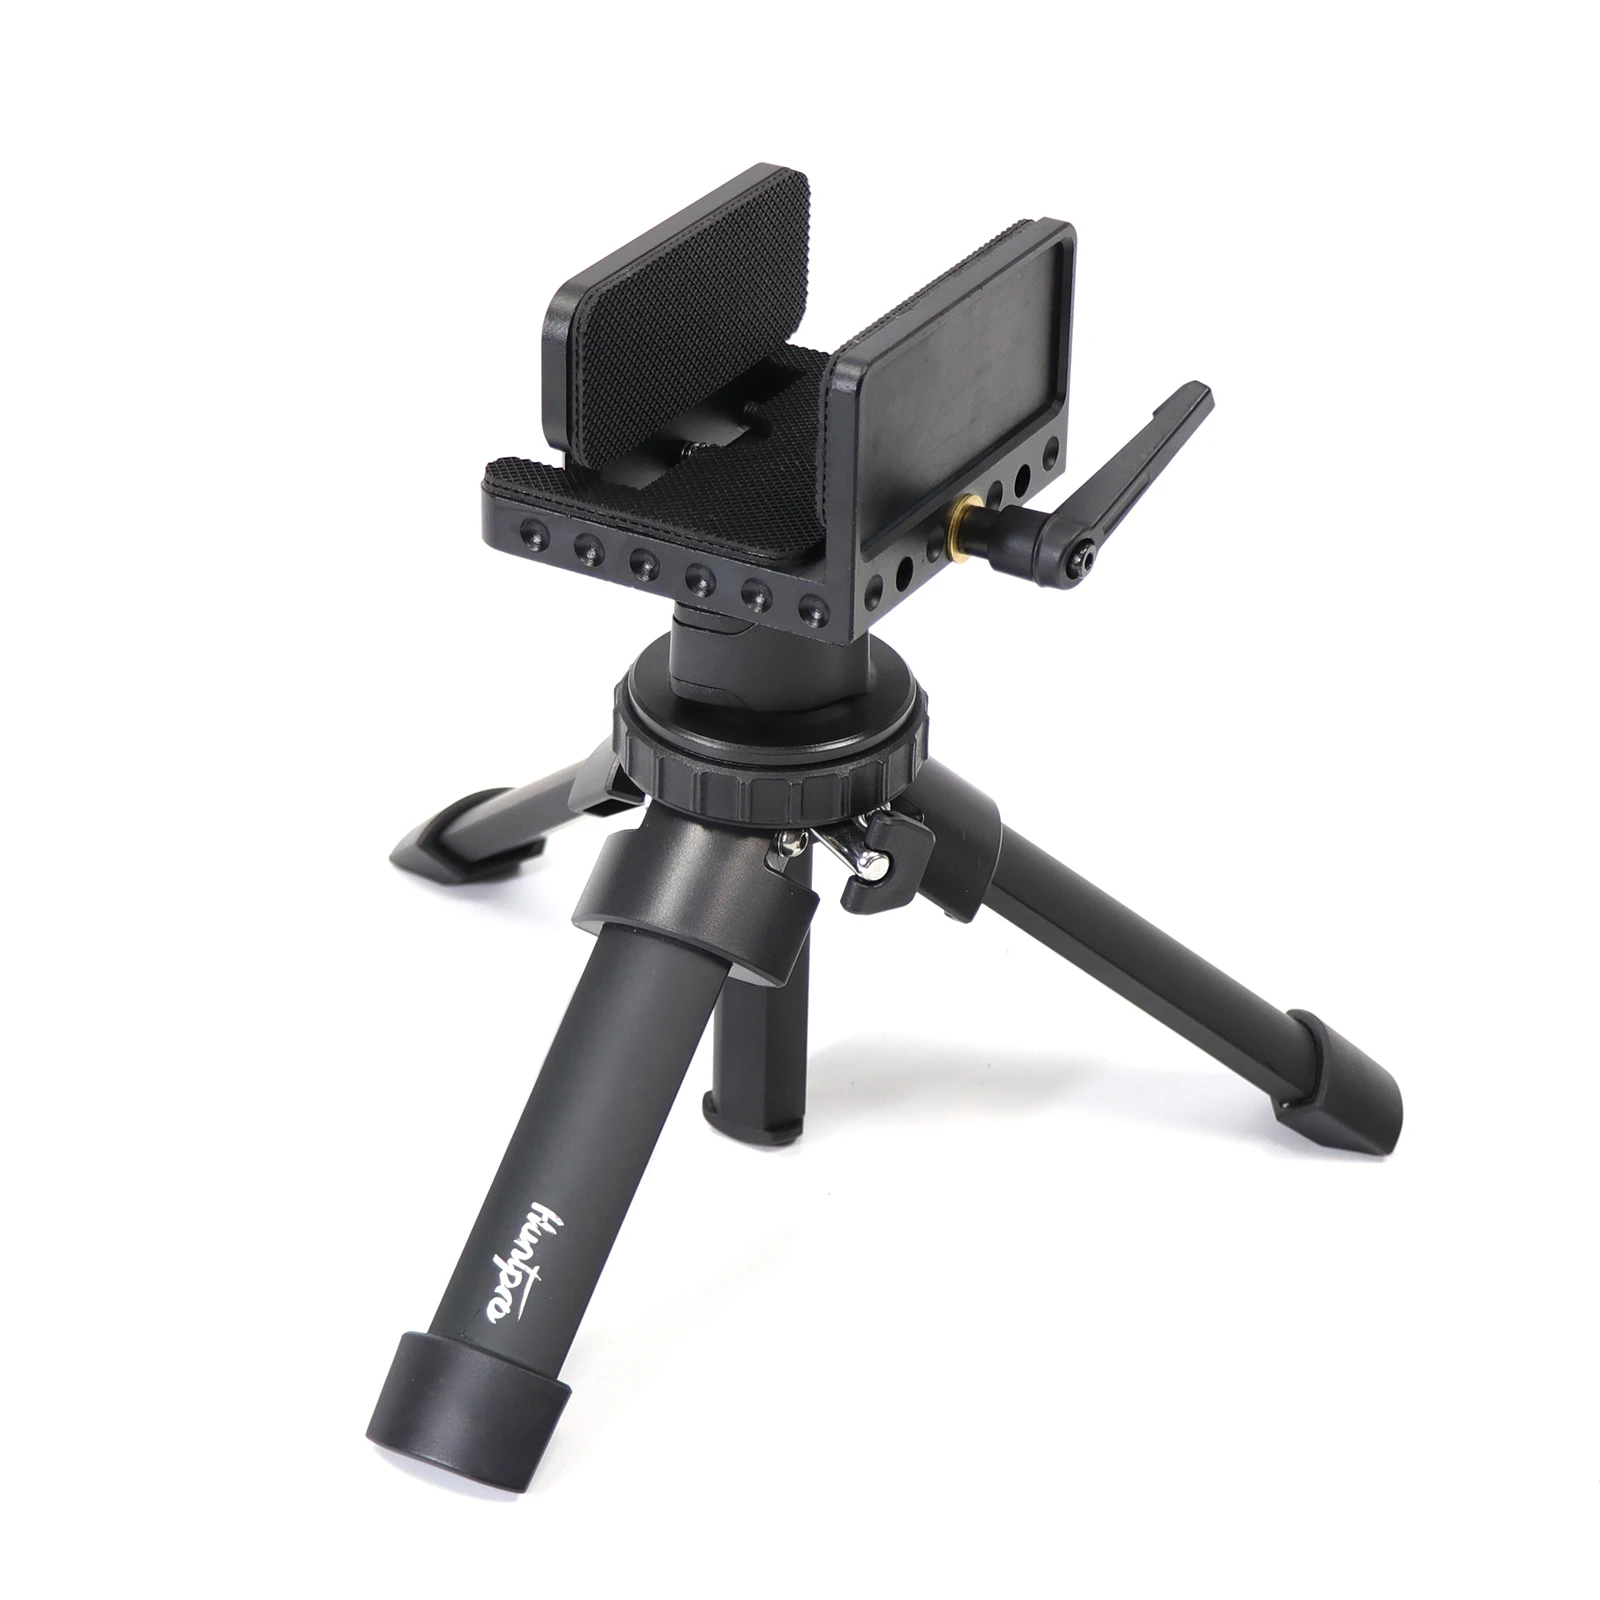 Professional Shooting Rest Telescope Mini Aluminum Camera Adjustable Height Bench Rest Shooting Stick for Outdoors Enthusiasts